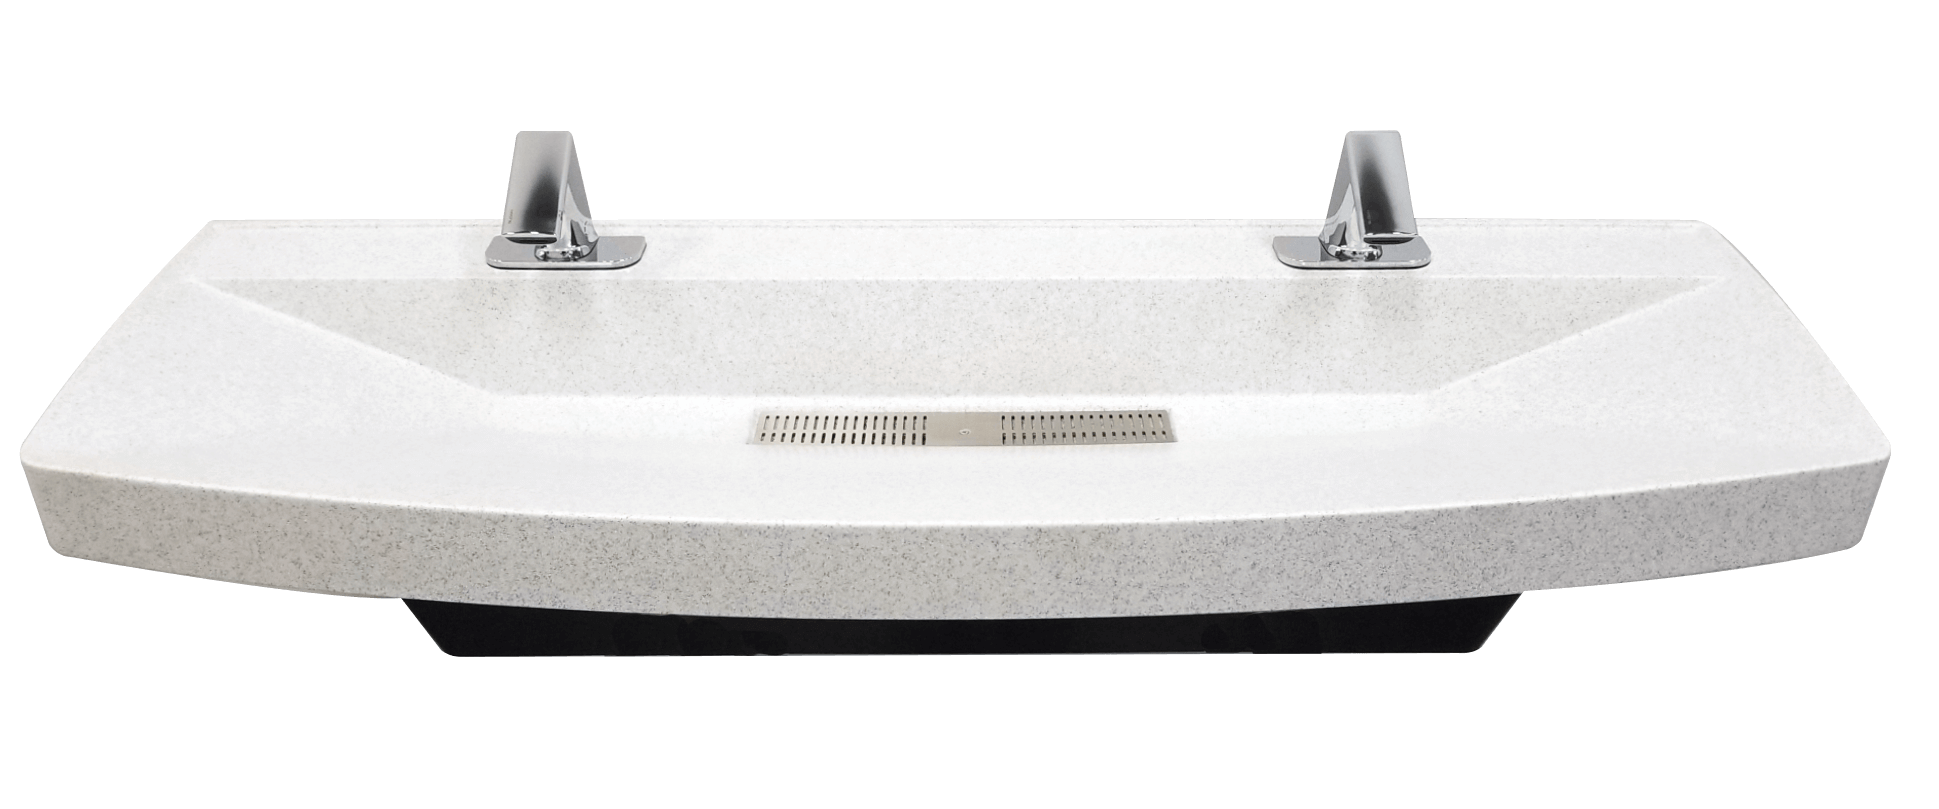 Envy Lavatory Systems by Willoughby Industries